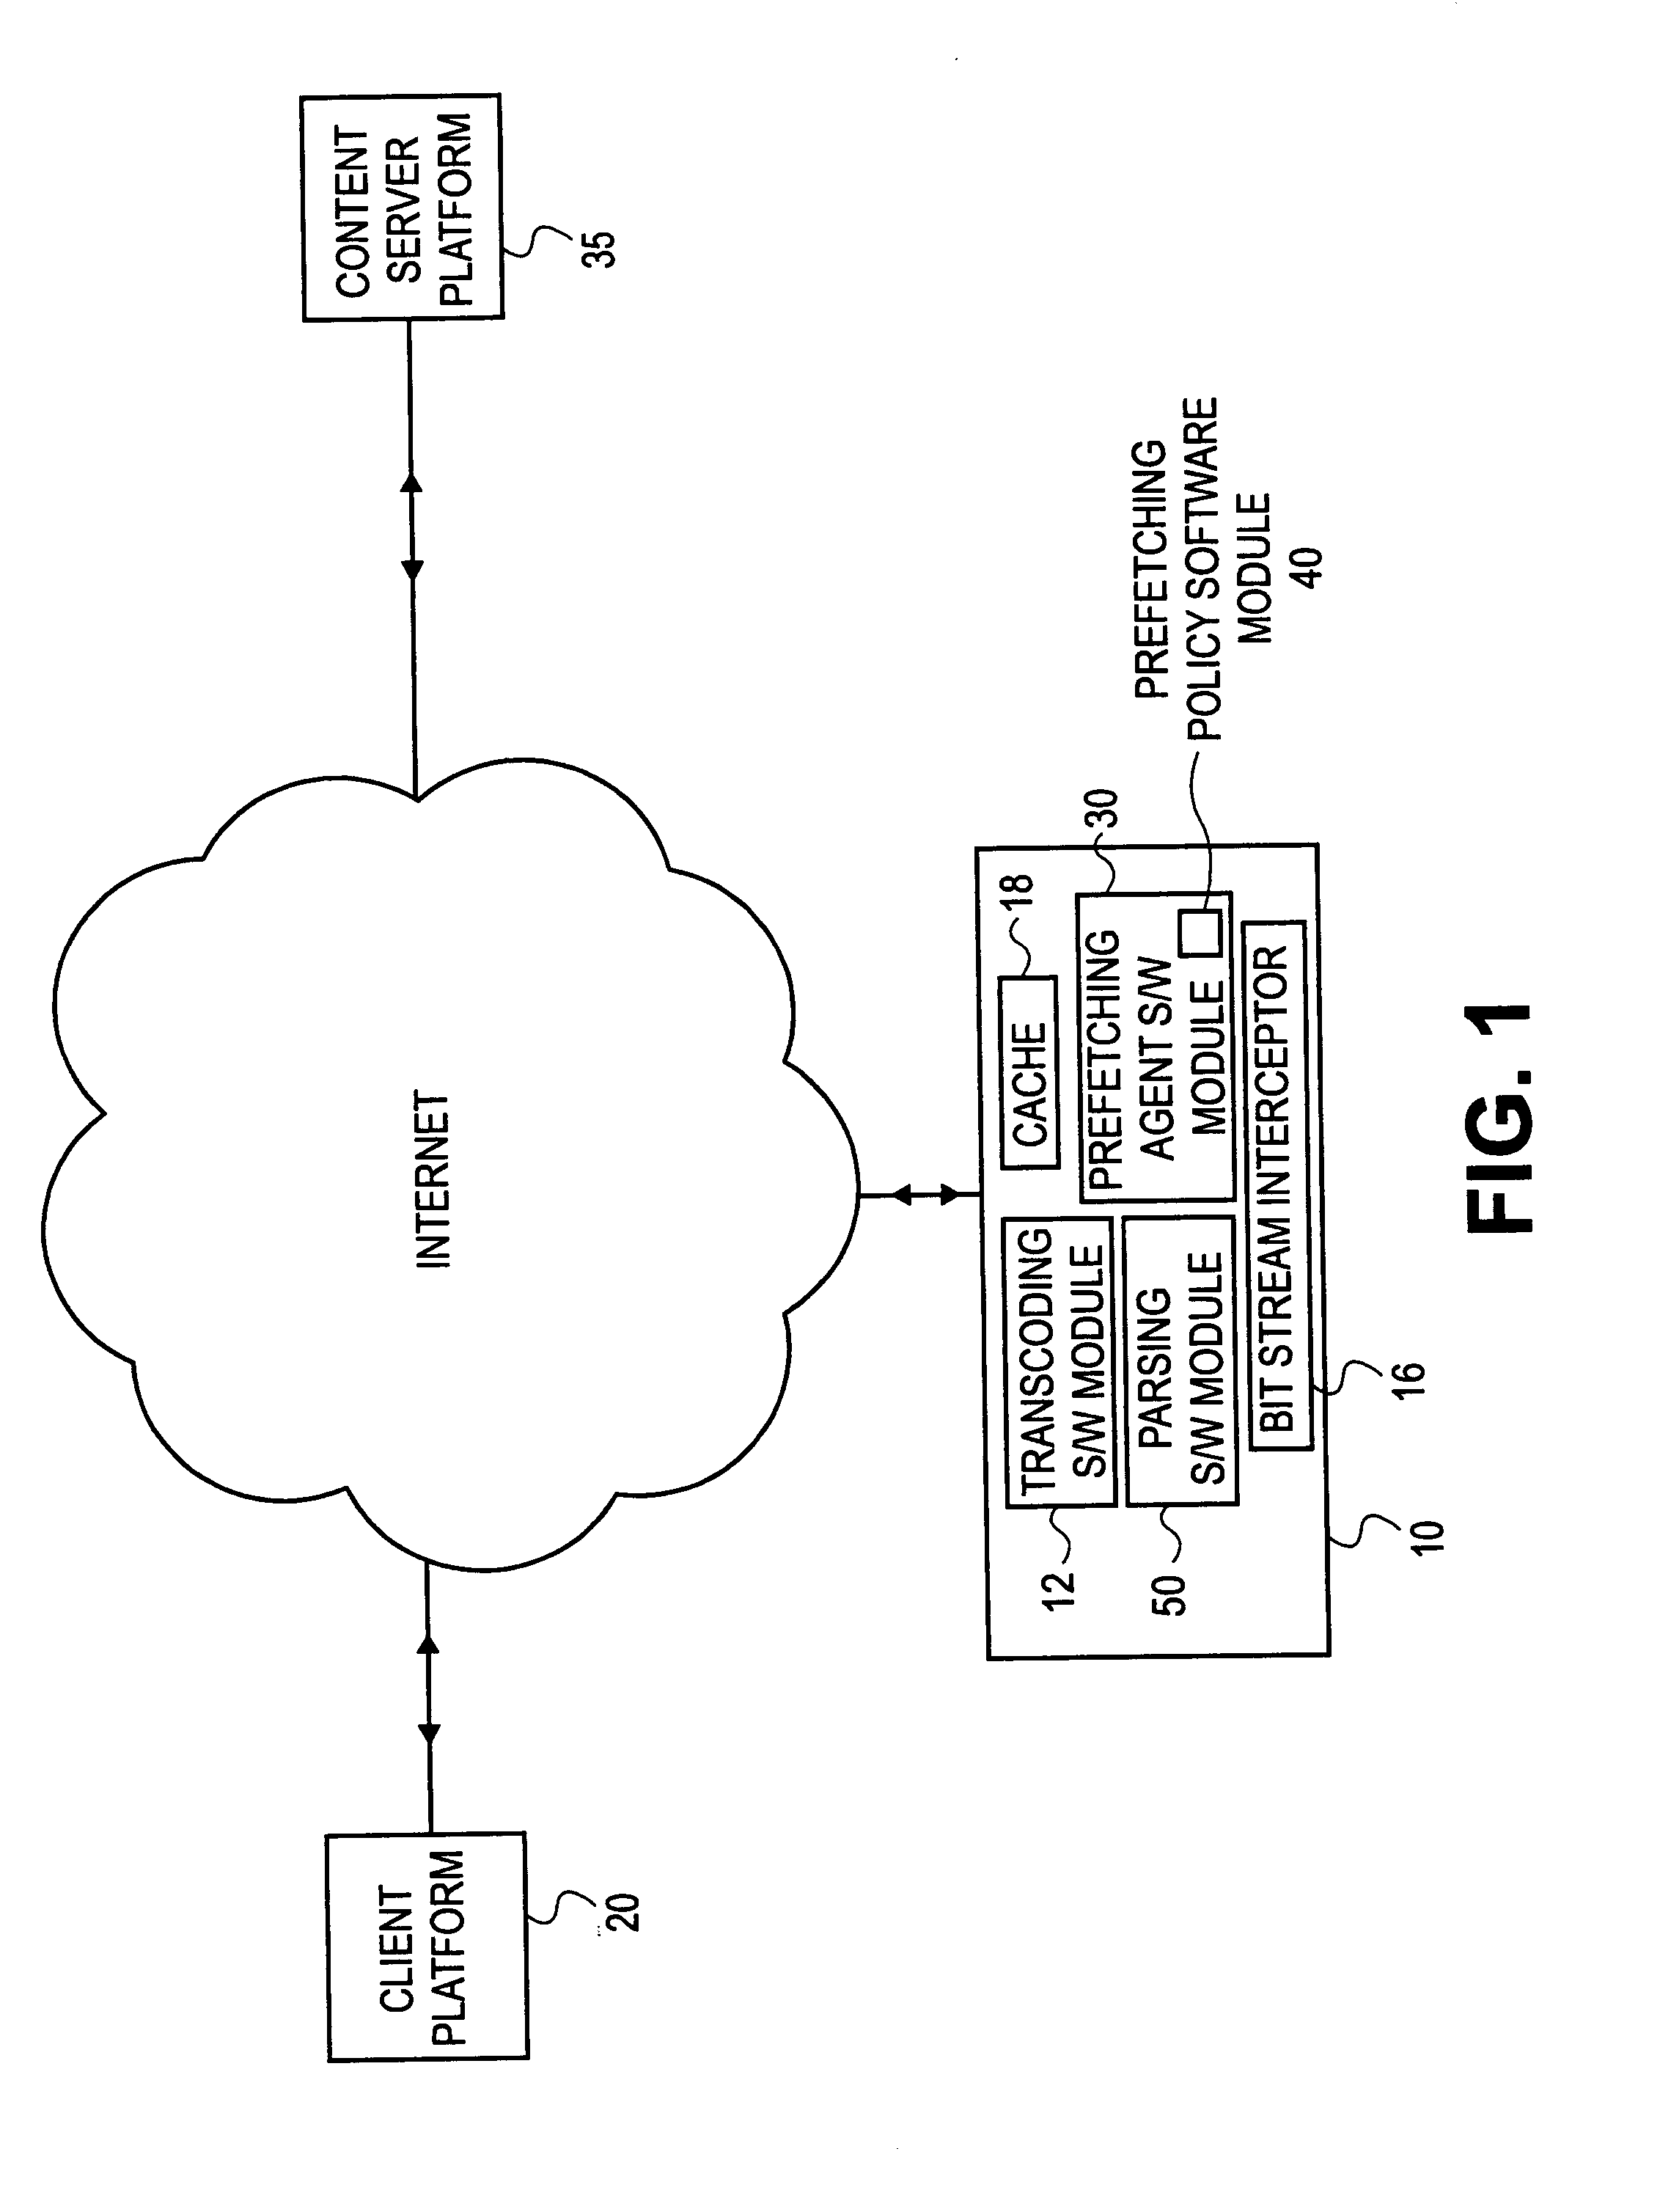 Method of proxy-assisted predictive pre-fetching with transcoding